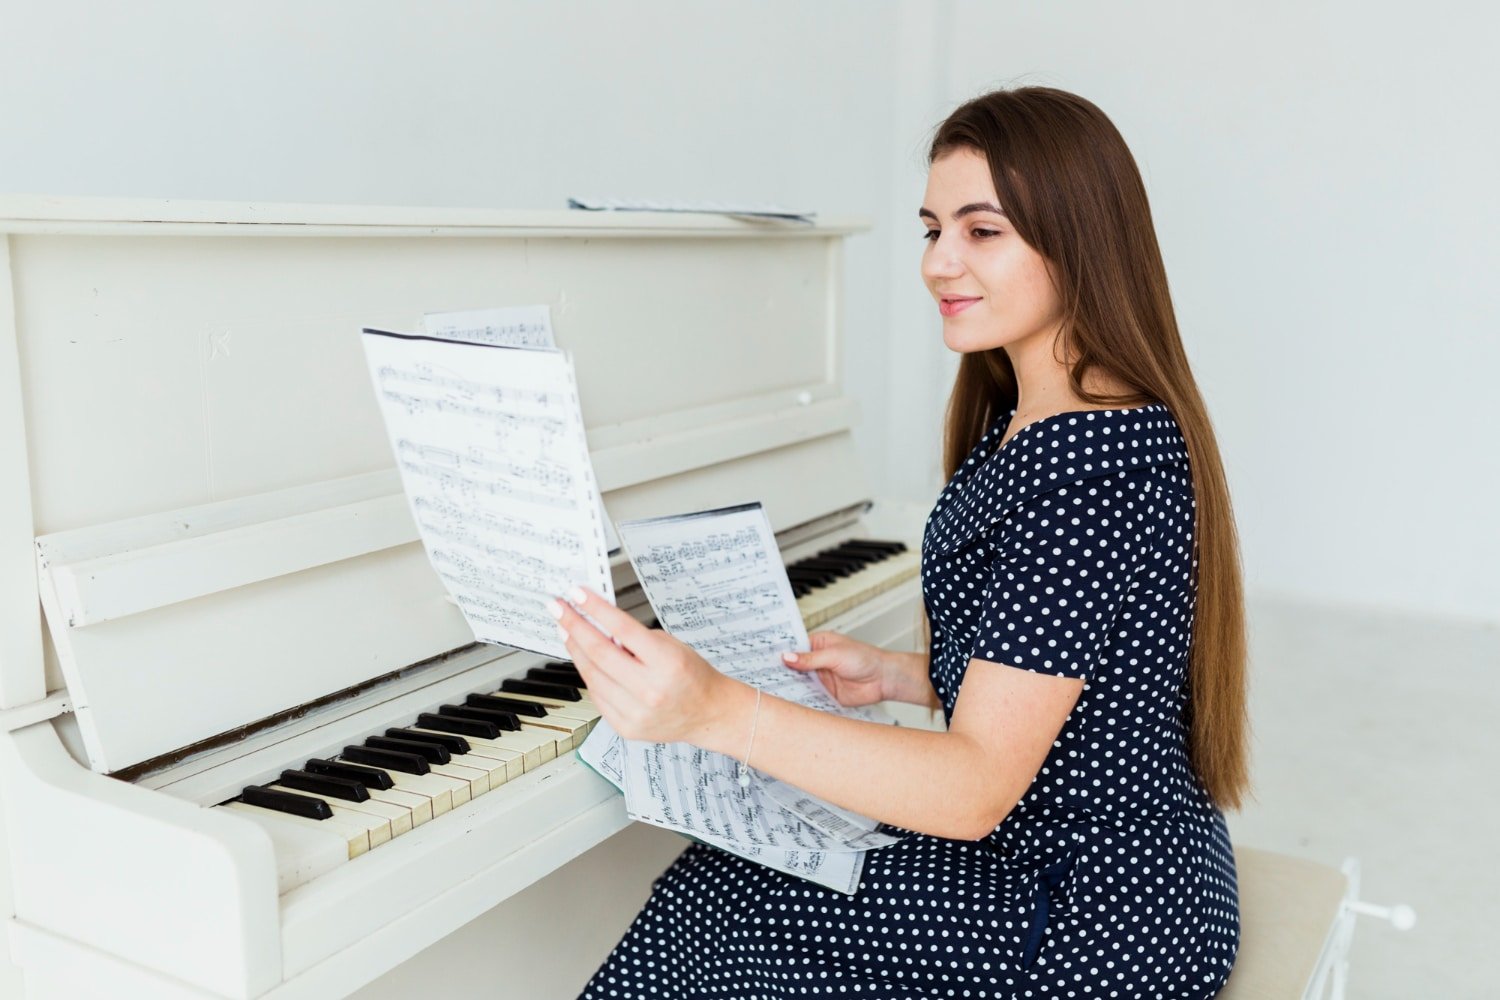 Find Sheet Music For Any Instrument At Sheet Music Plus